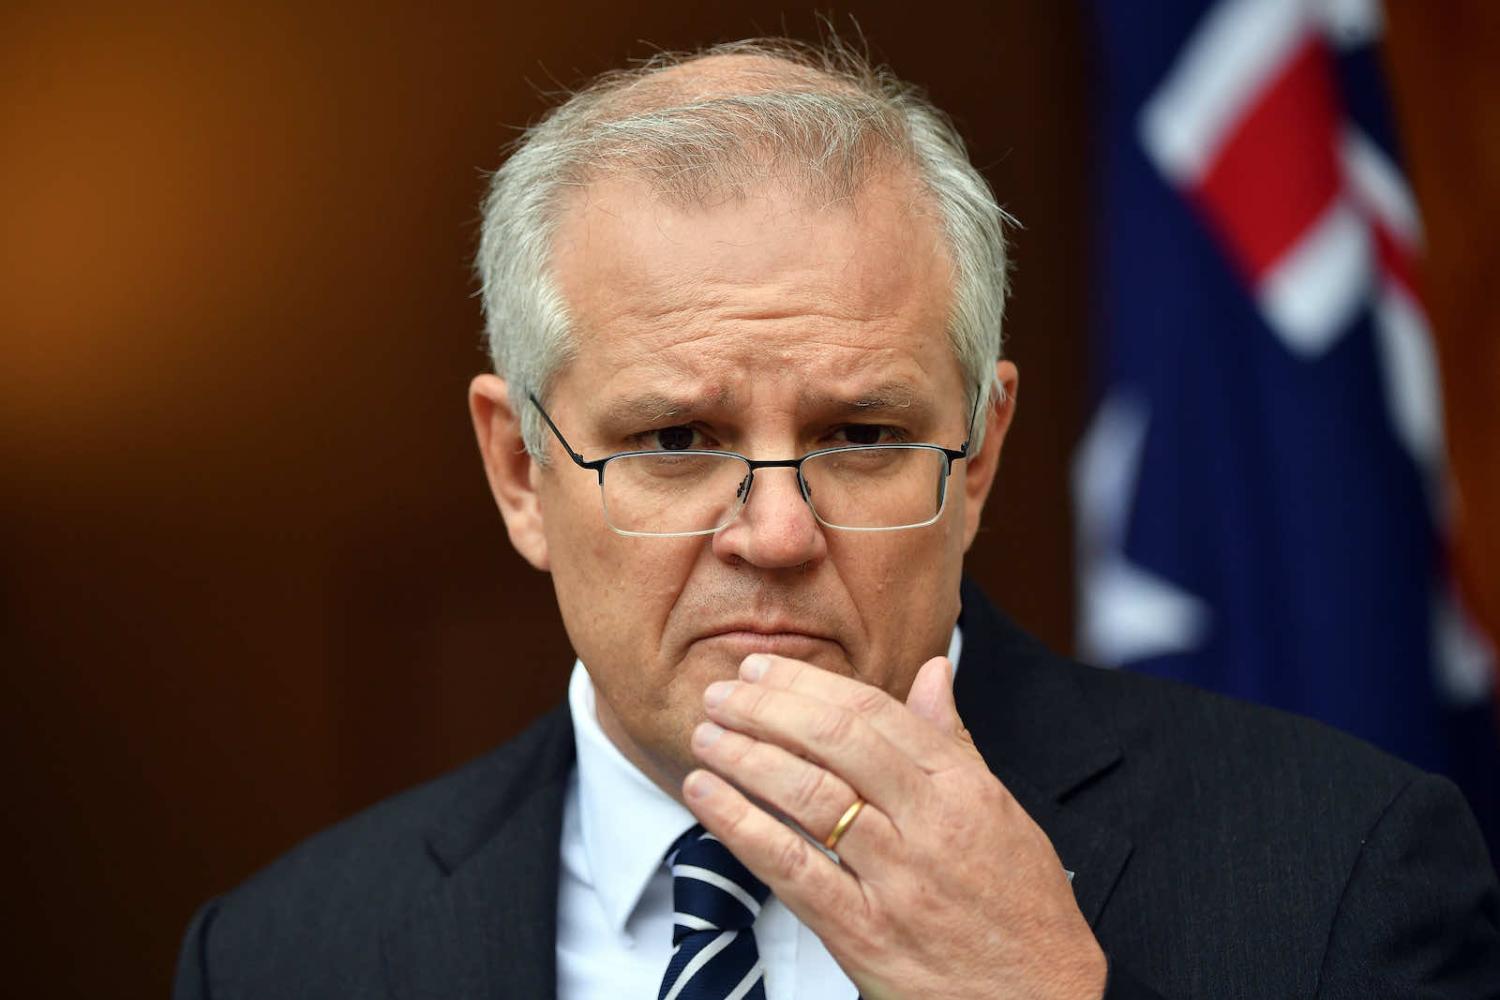 Scott Morrison should urge Joe Biden to spend as much time as possible on deepening ties with smaller countries in the region (Sam Mooy/Getty Images)